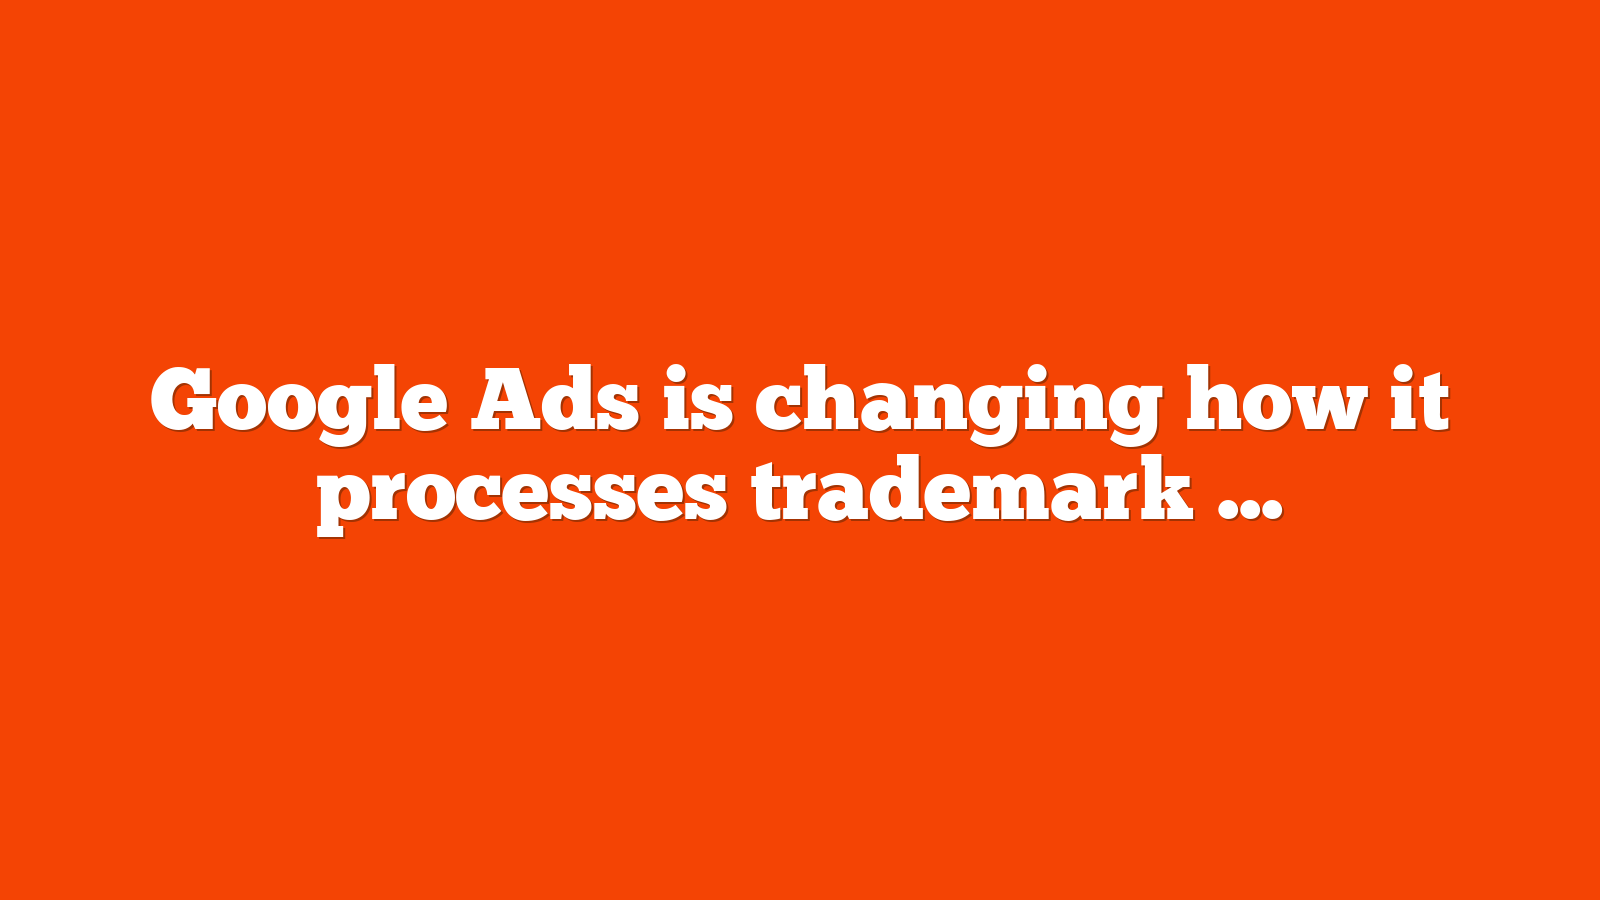 Google Ads is changing how it processes trademark complaints